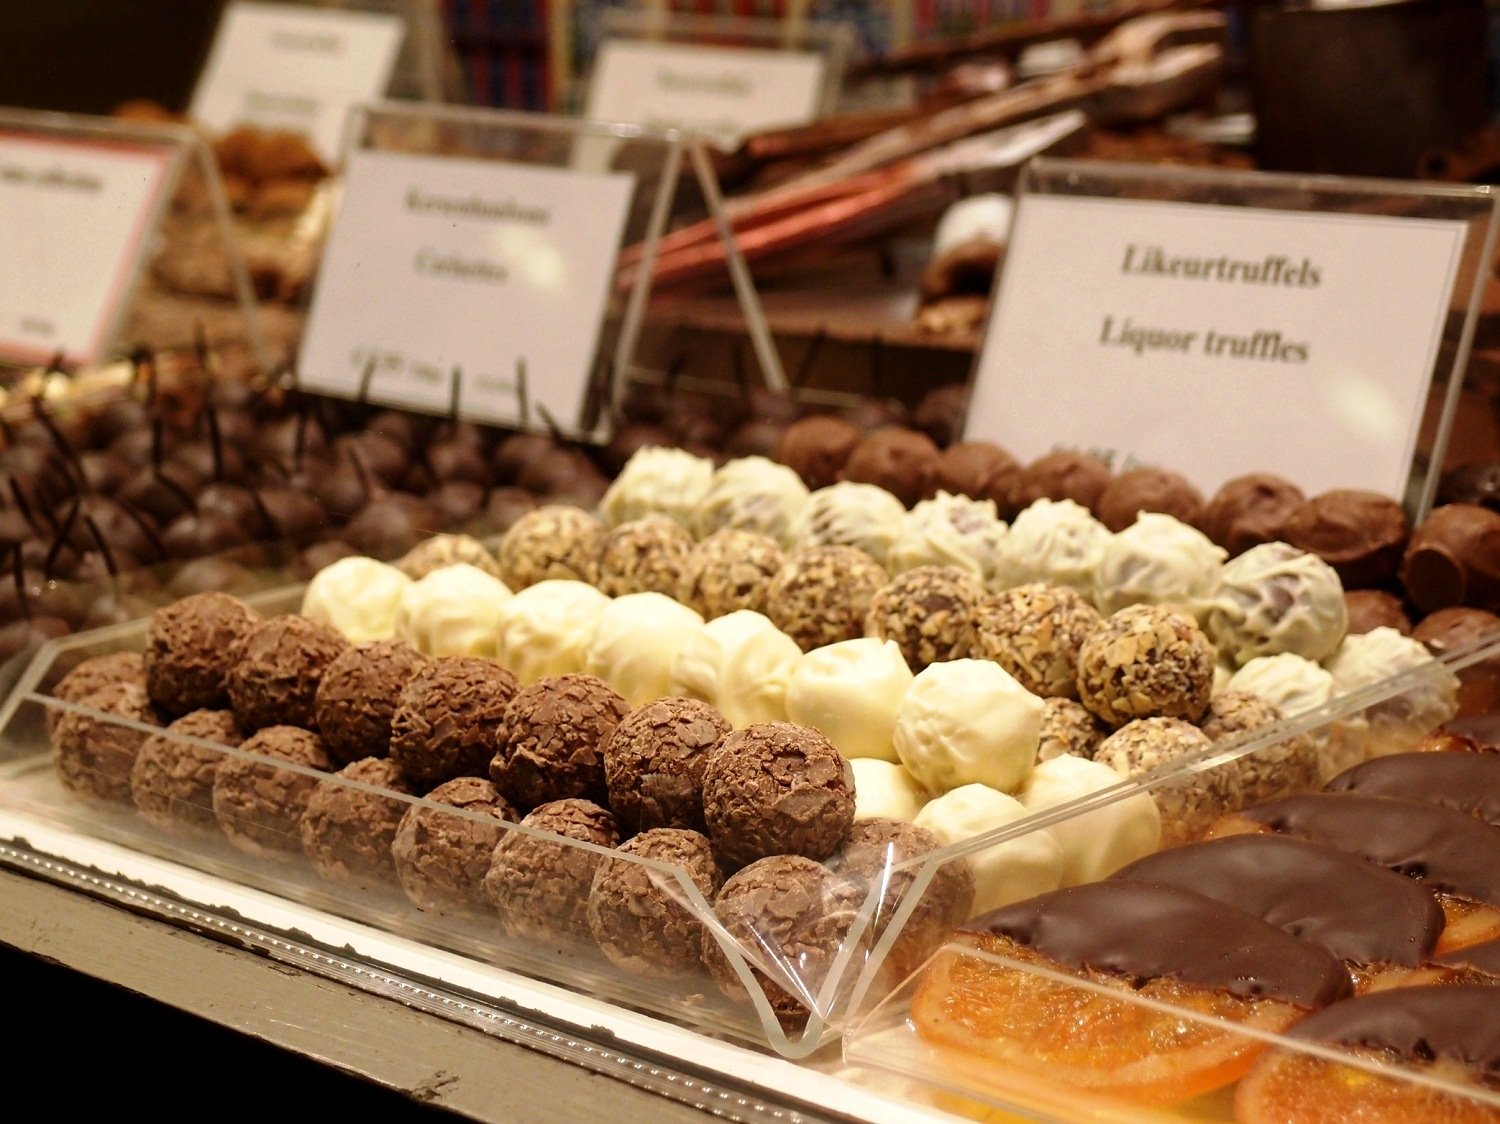 FSSAI to allow up to 5% vegetable fats in chocolates